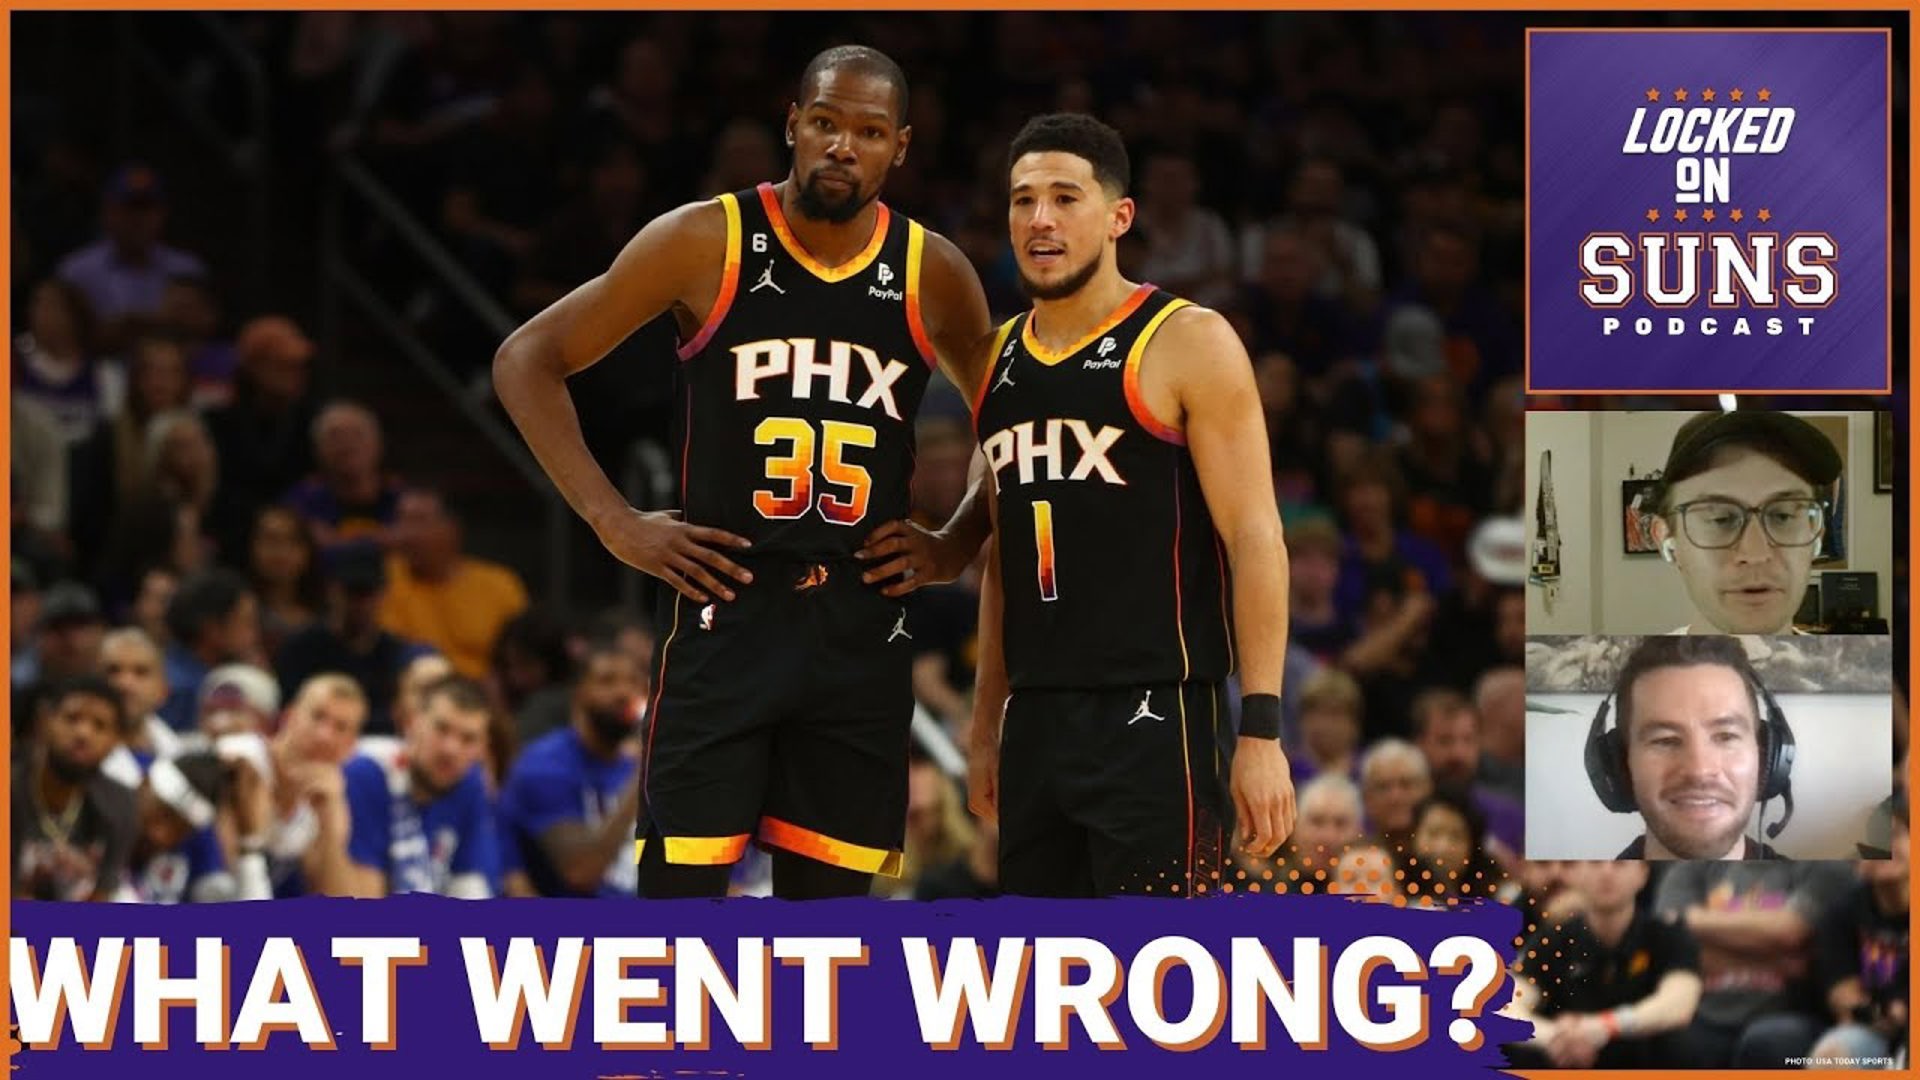 From trades for Kevin Durant and Bradley Beal to a new head coach and many injuries, the Phoenix Suns had a ton of challenges this season. What was the biggest issue